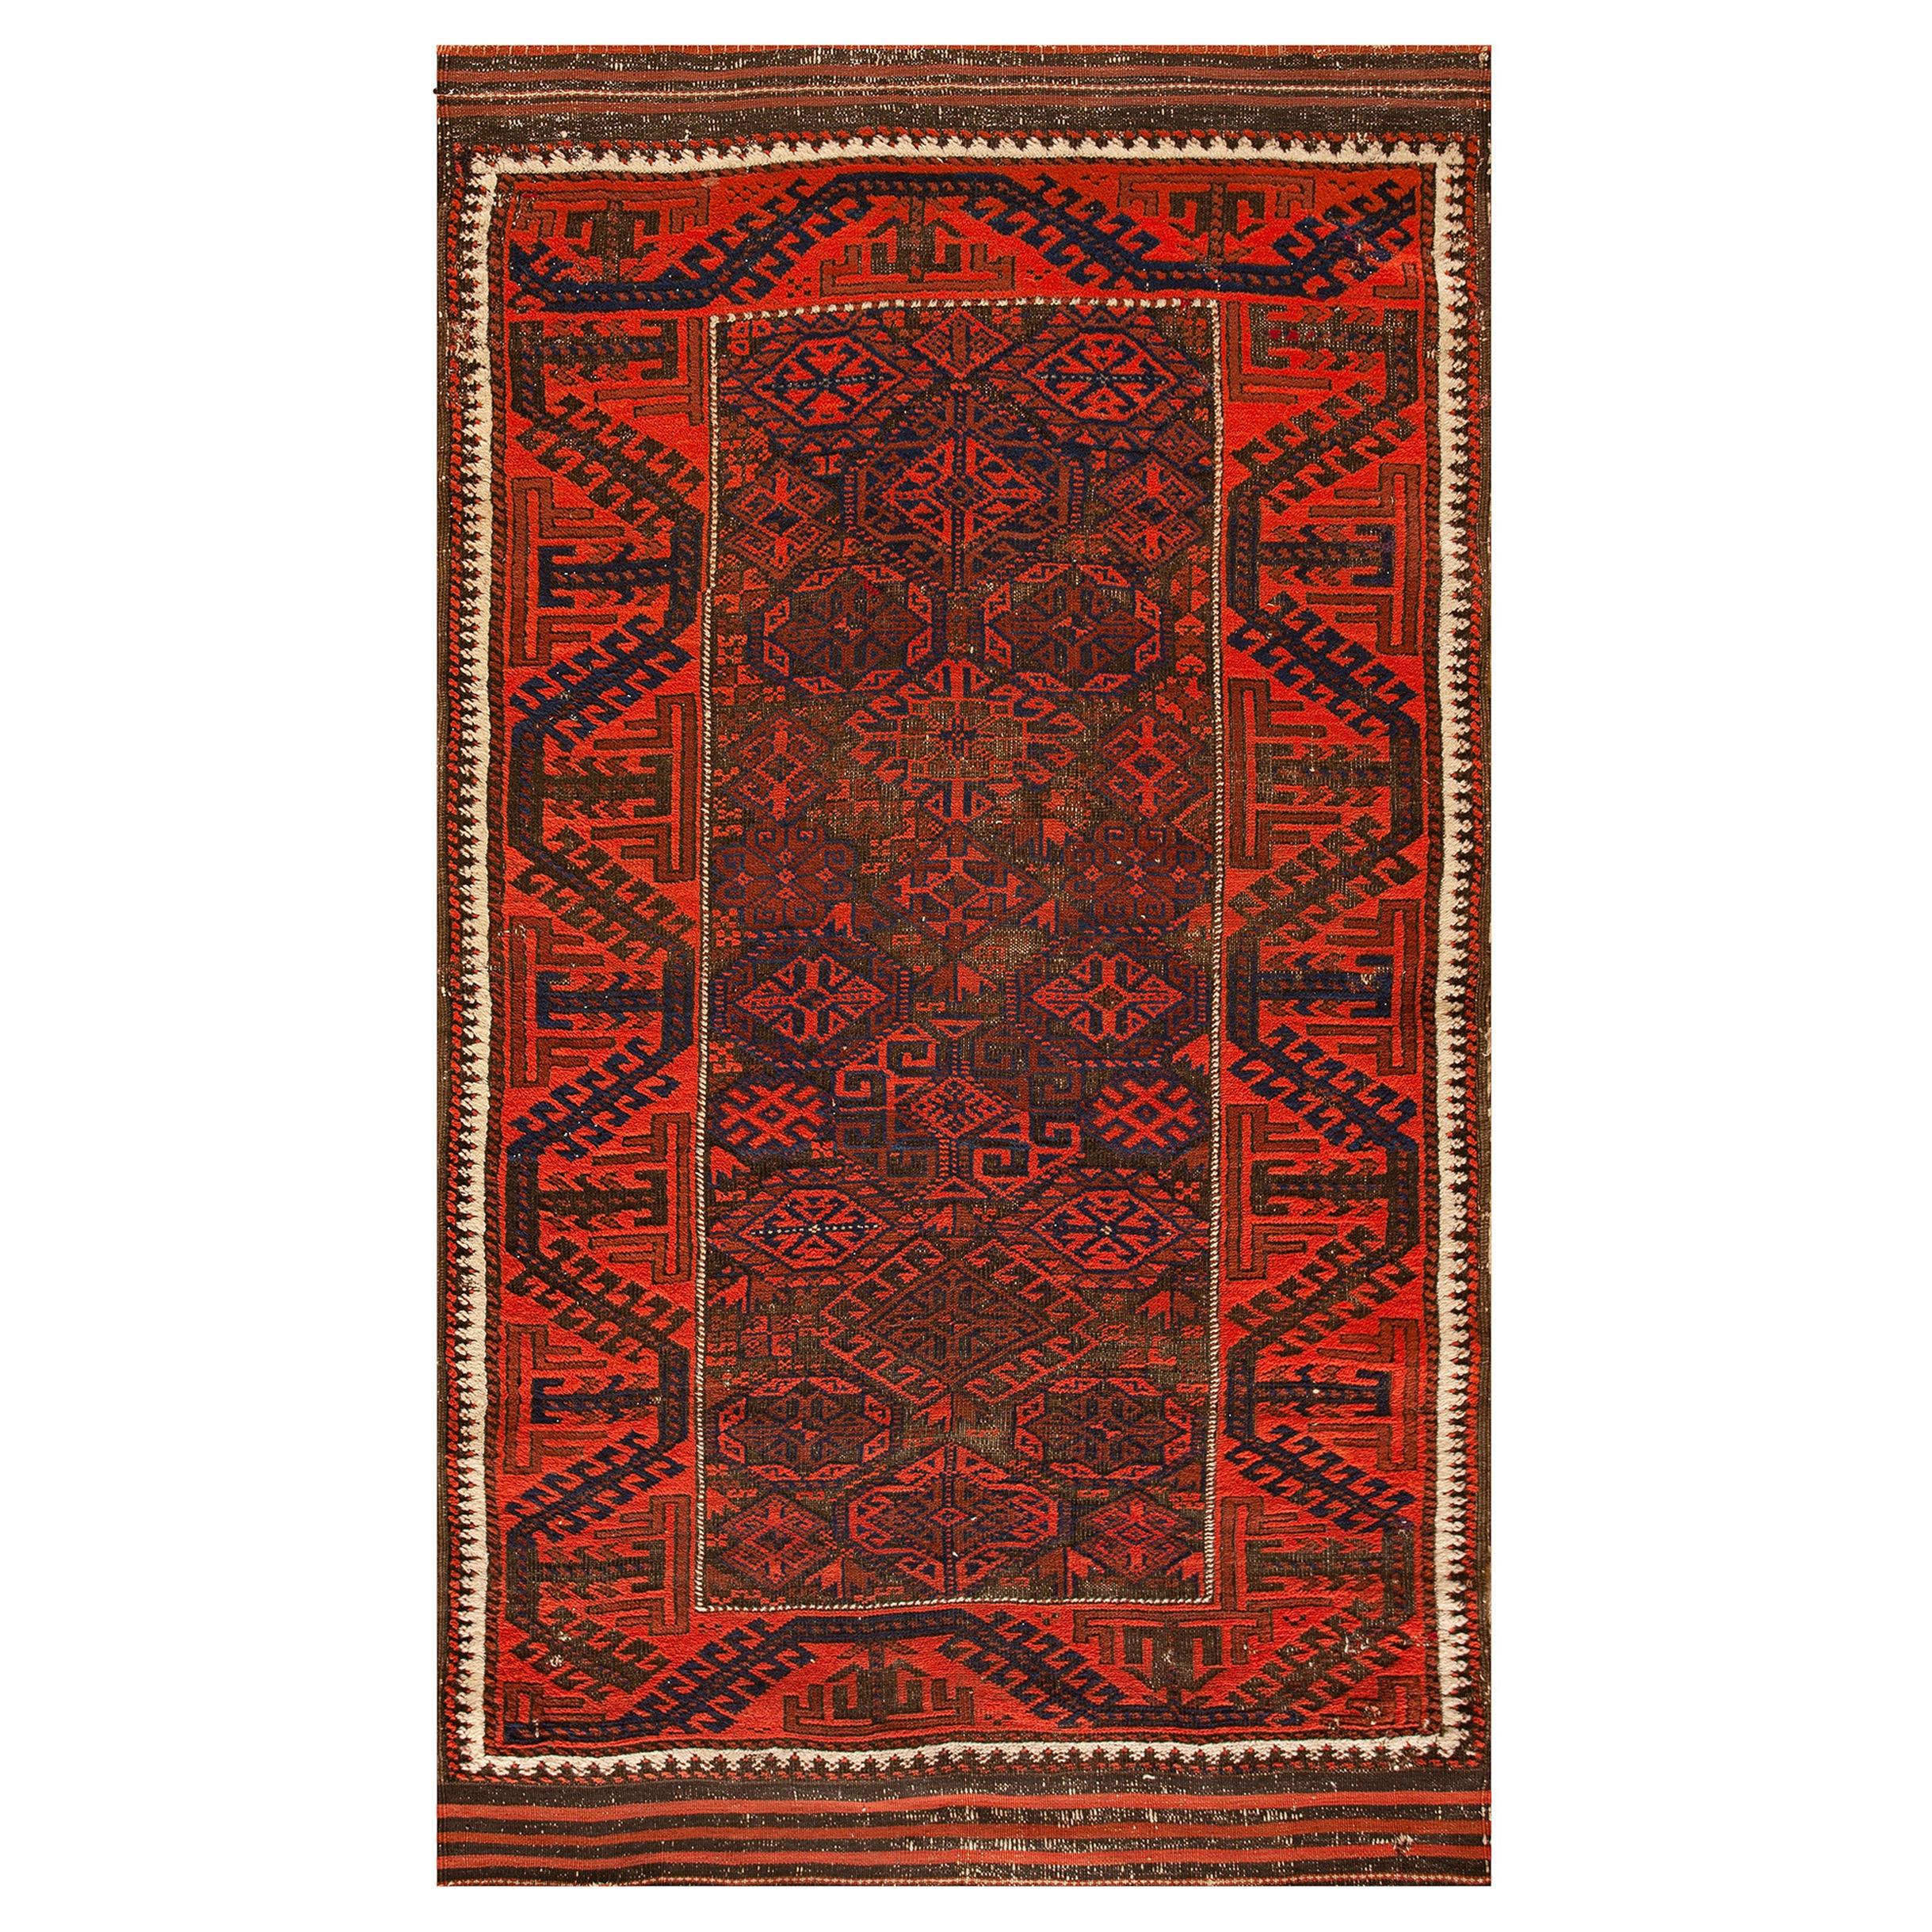 Late 19th Century N.E. Persian Baluch Carpet ( 3'1" x 5'8" - 94 x 173 ) For Sale